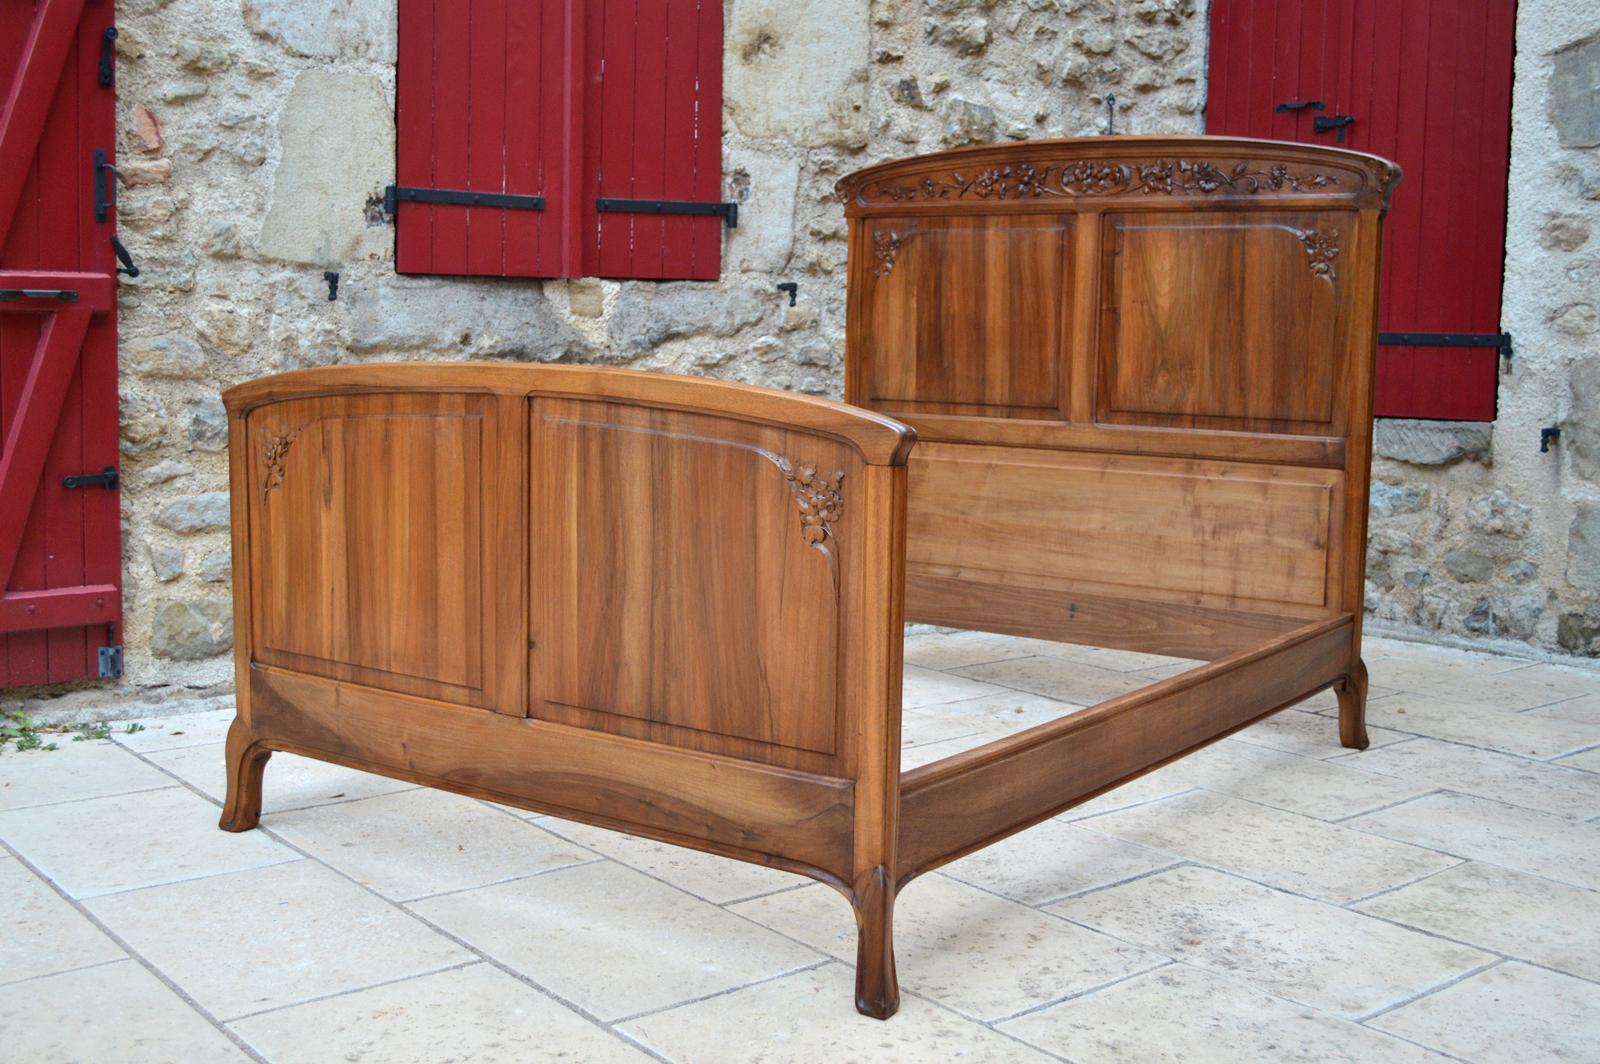 Early 20th Century French Art Nouveau Bedroom Set in Carved Walnut, Blooming Shrubs Theme For Sale